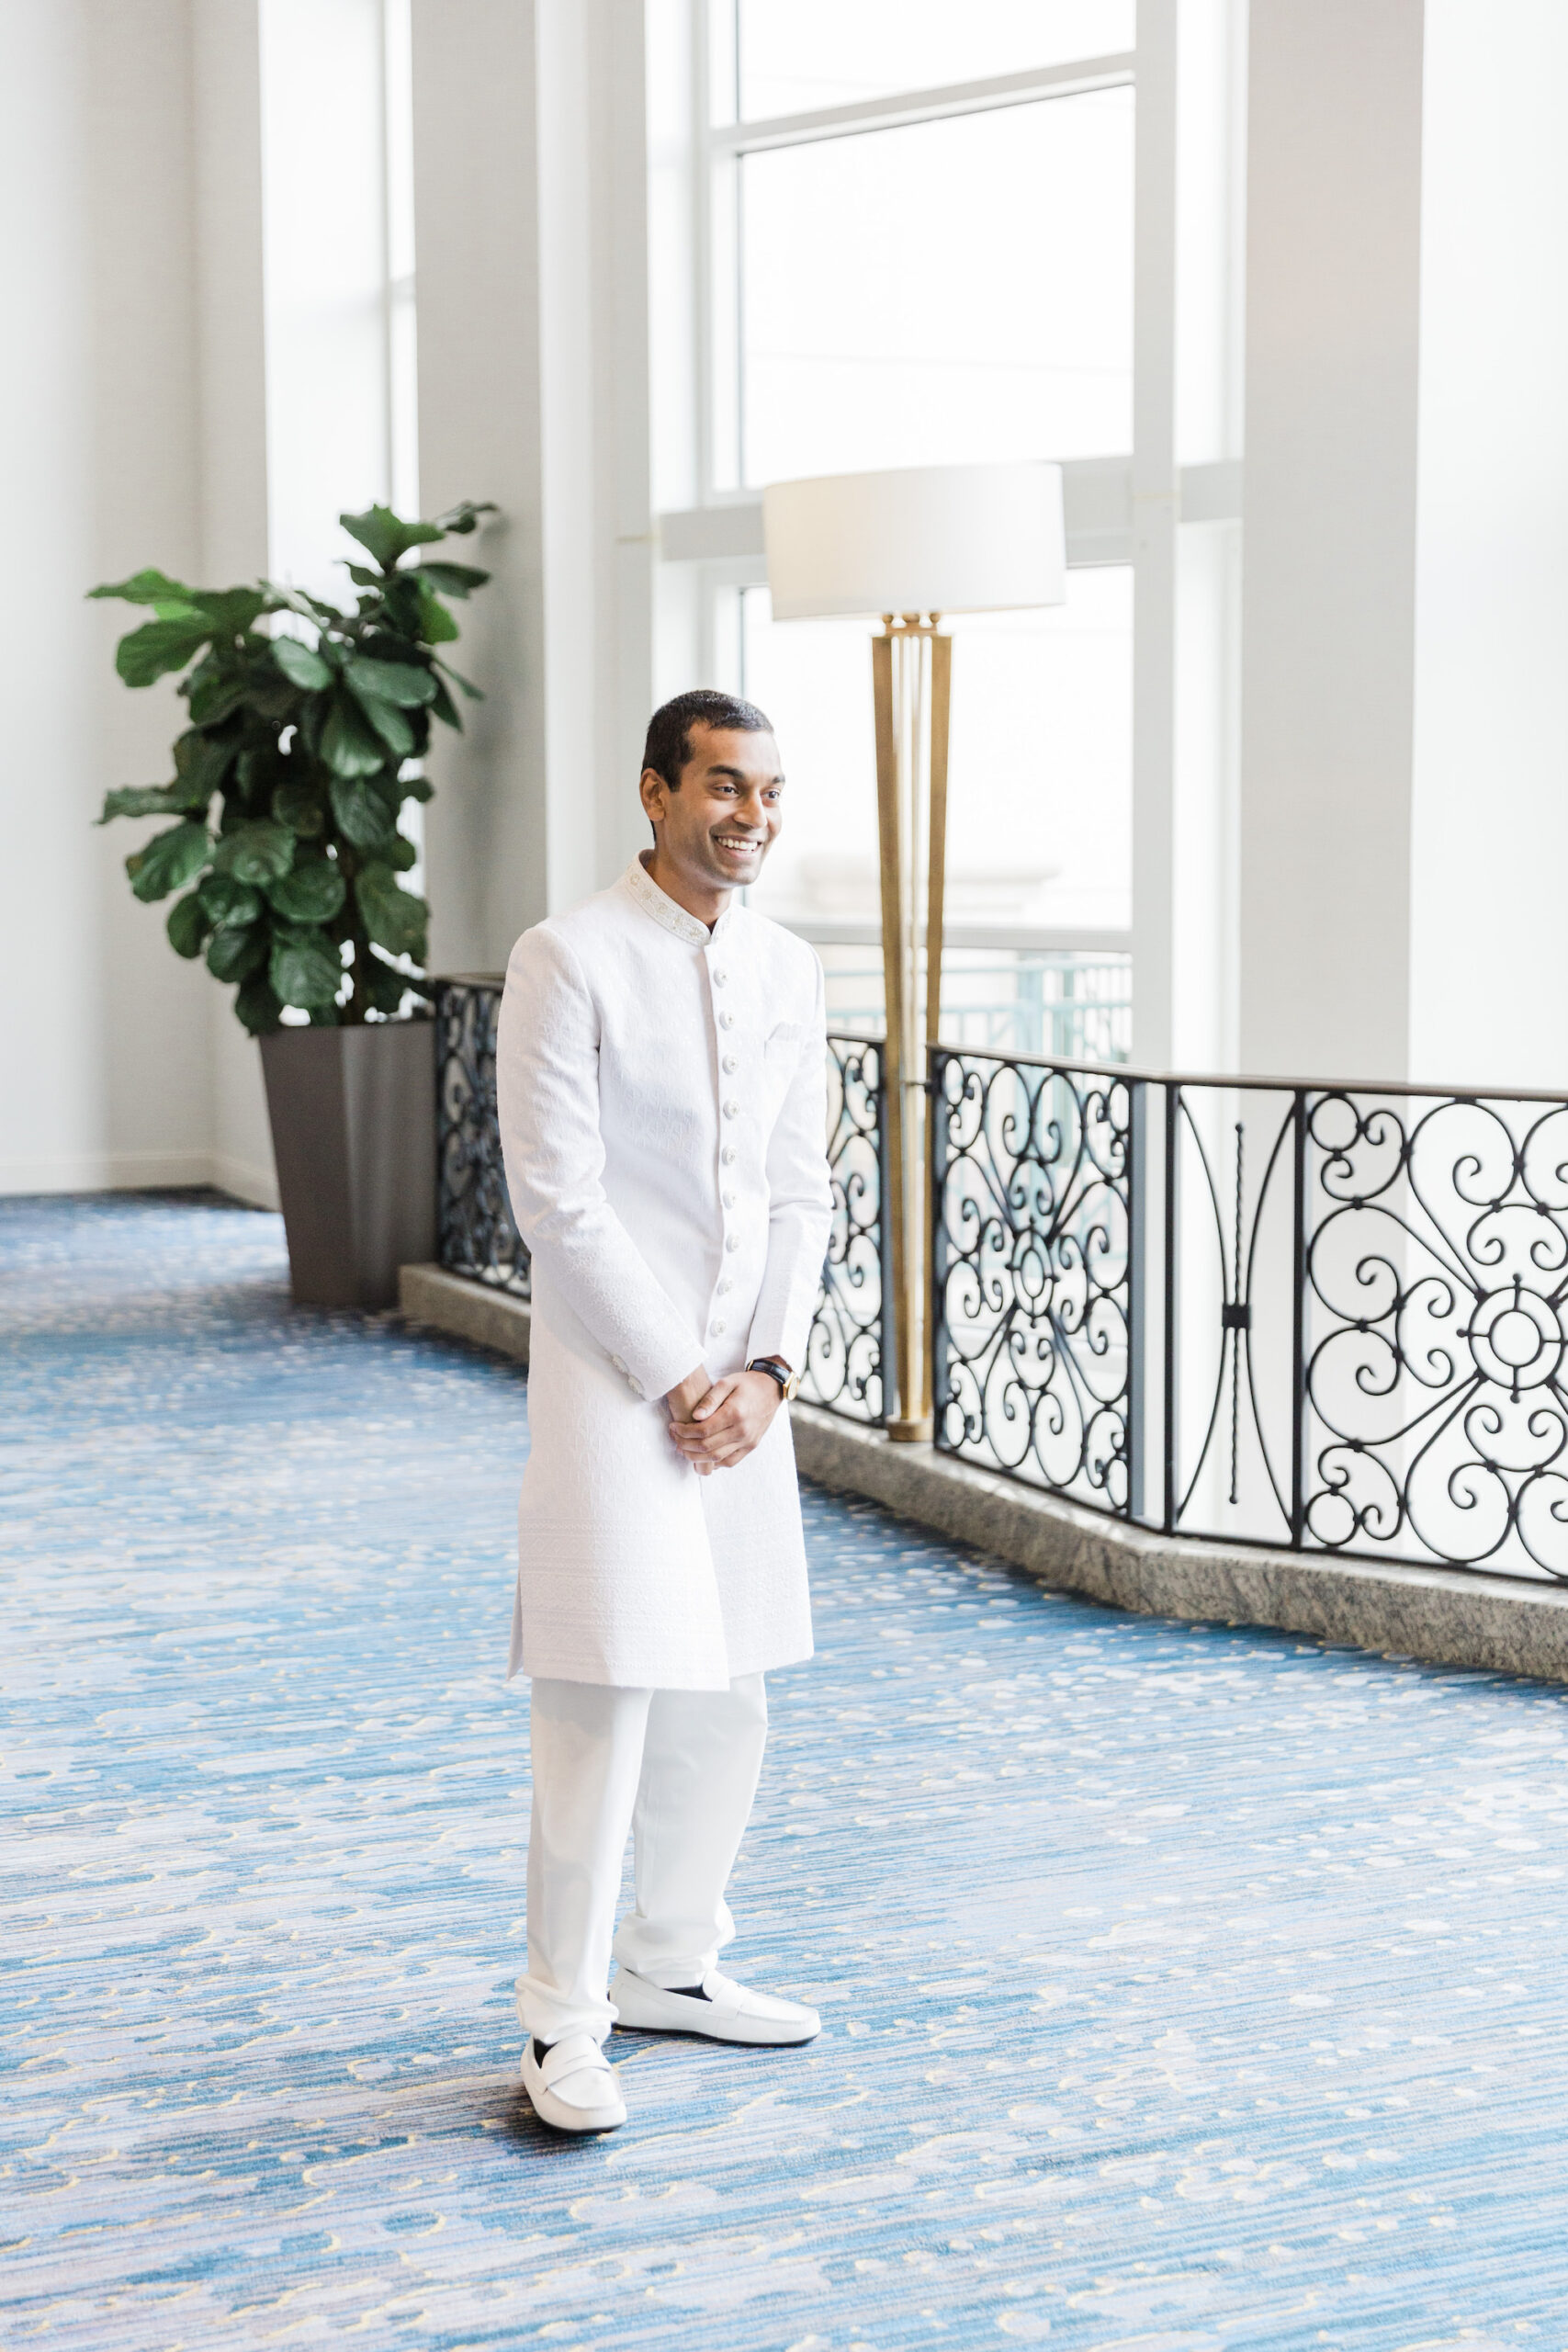 Bride and Groom First Look | Groom's White Indian Wedding Sherwani Inspiration